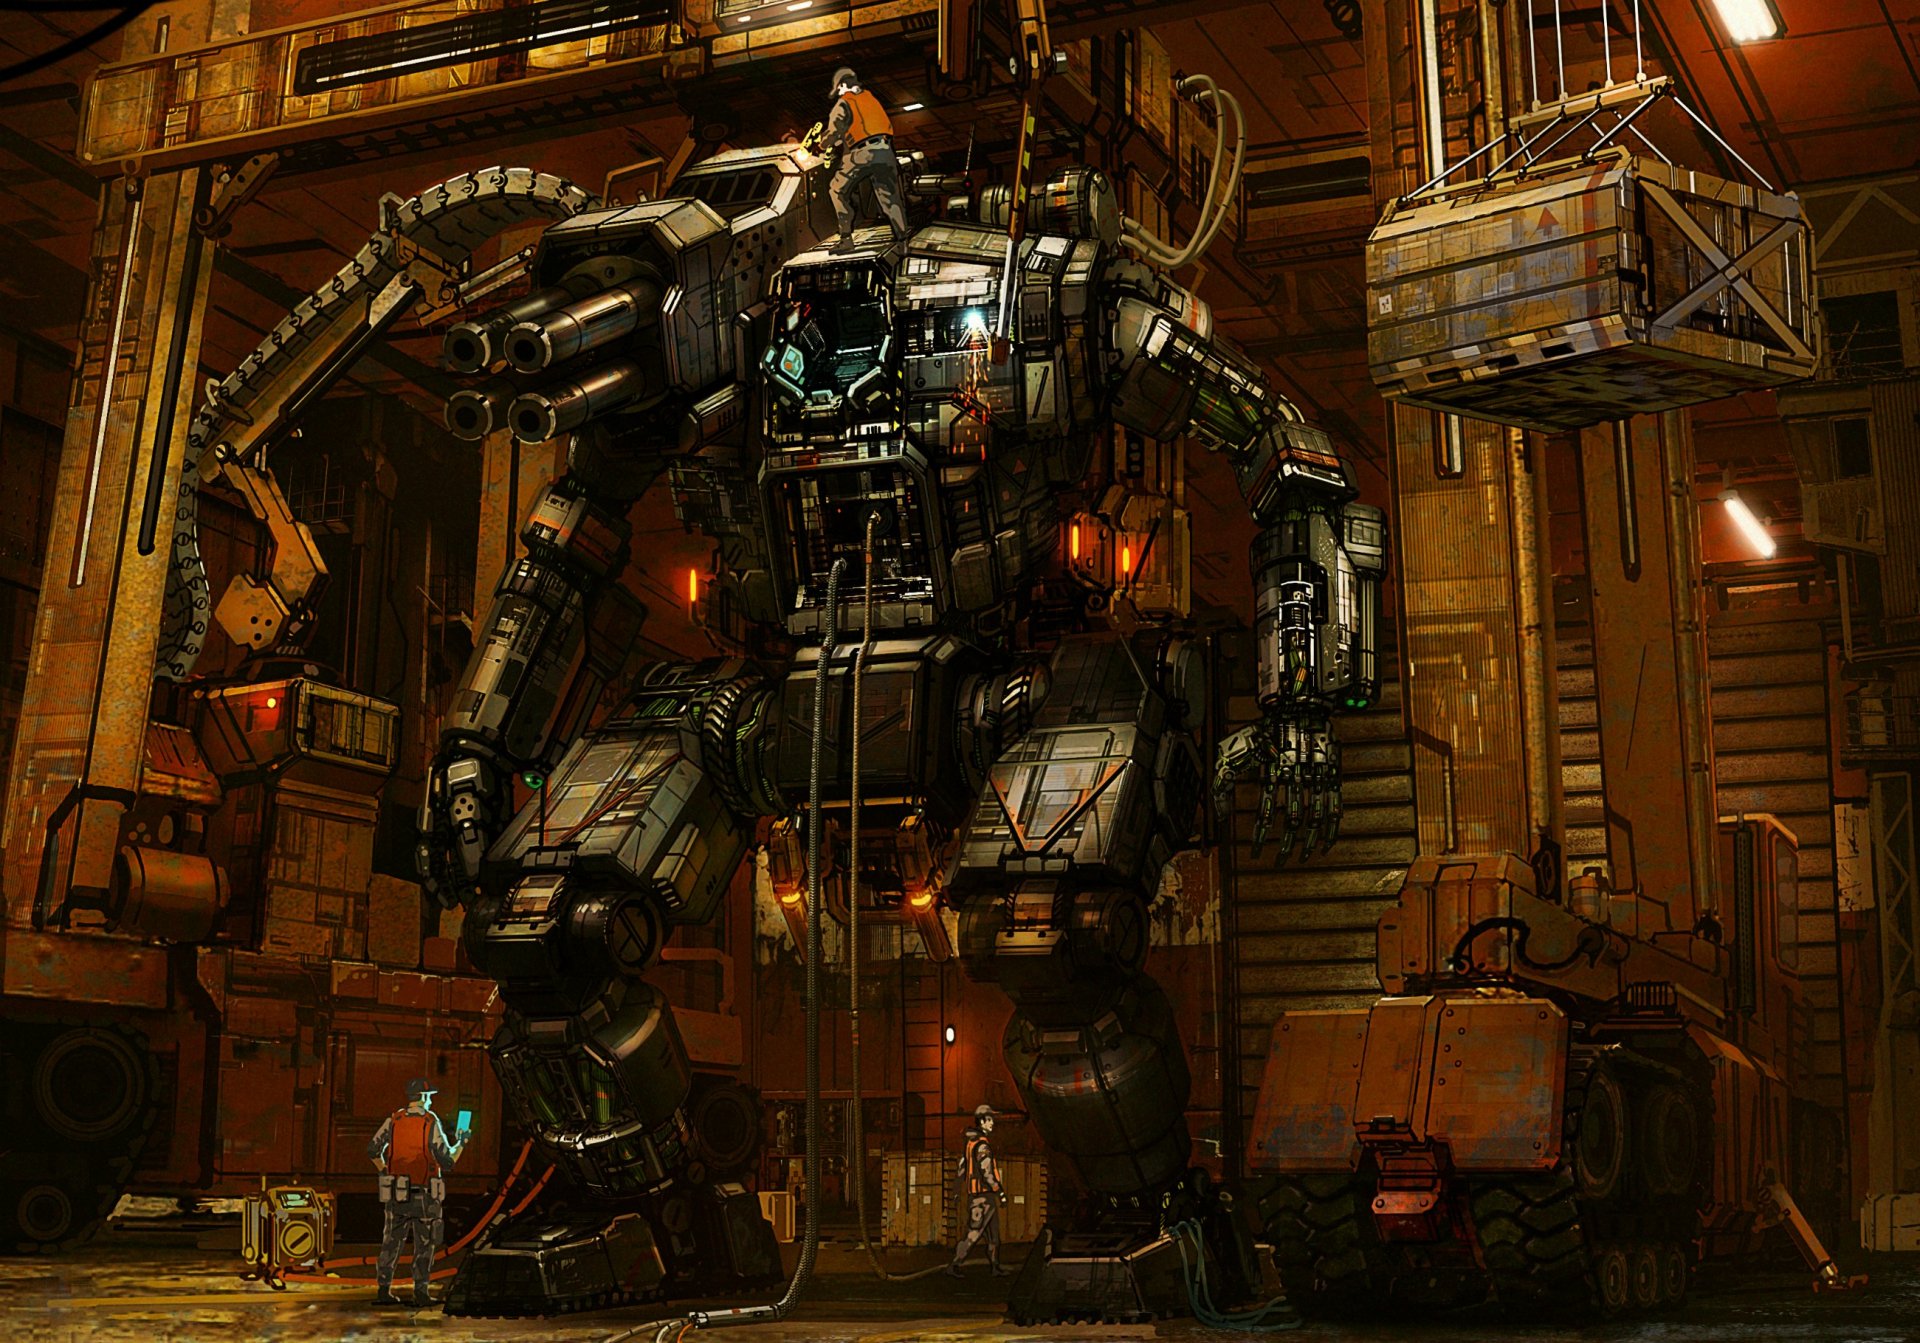 Hunchback (BattleTech) HD Wallpapers and Backgrounds.